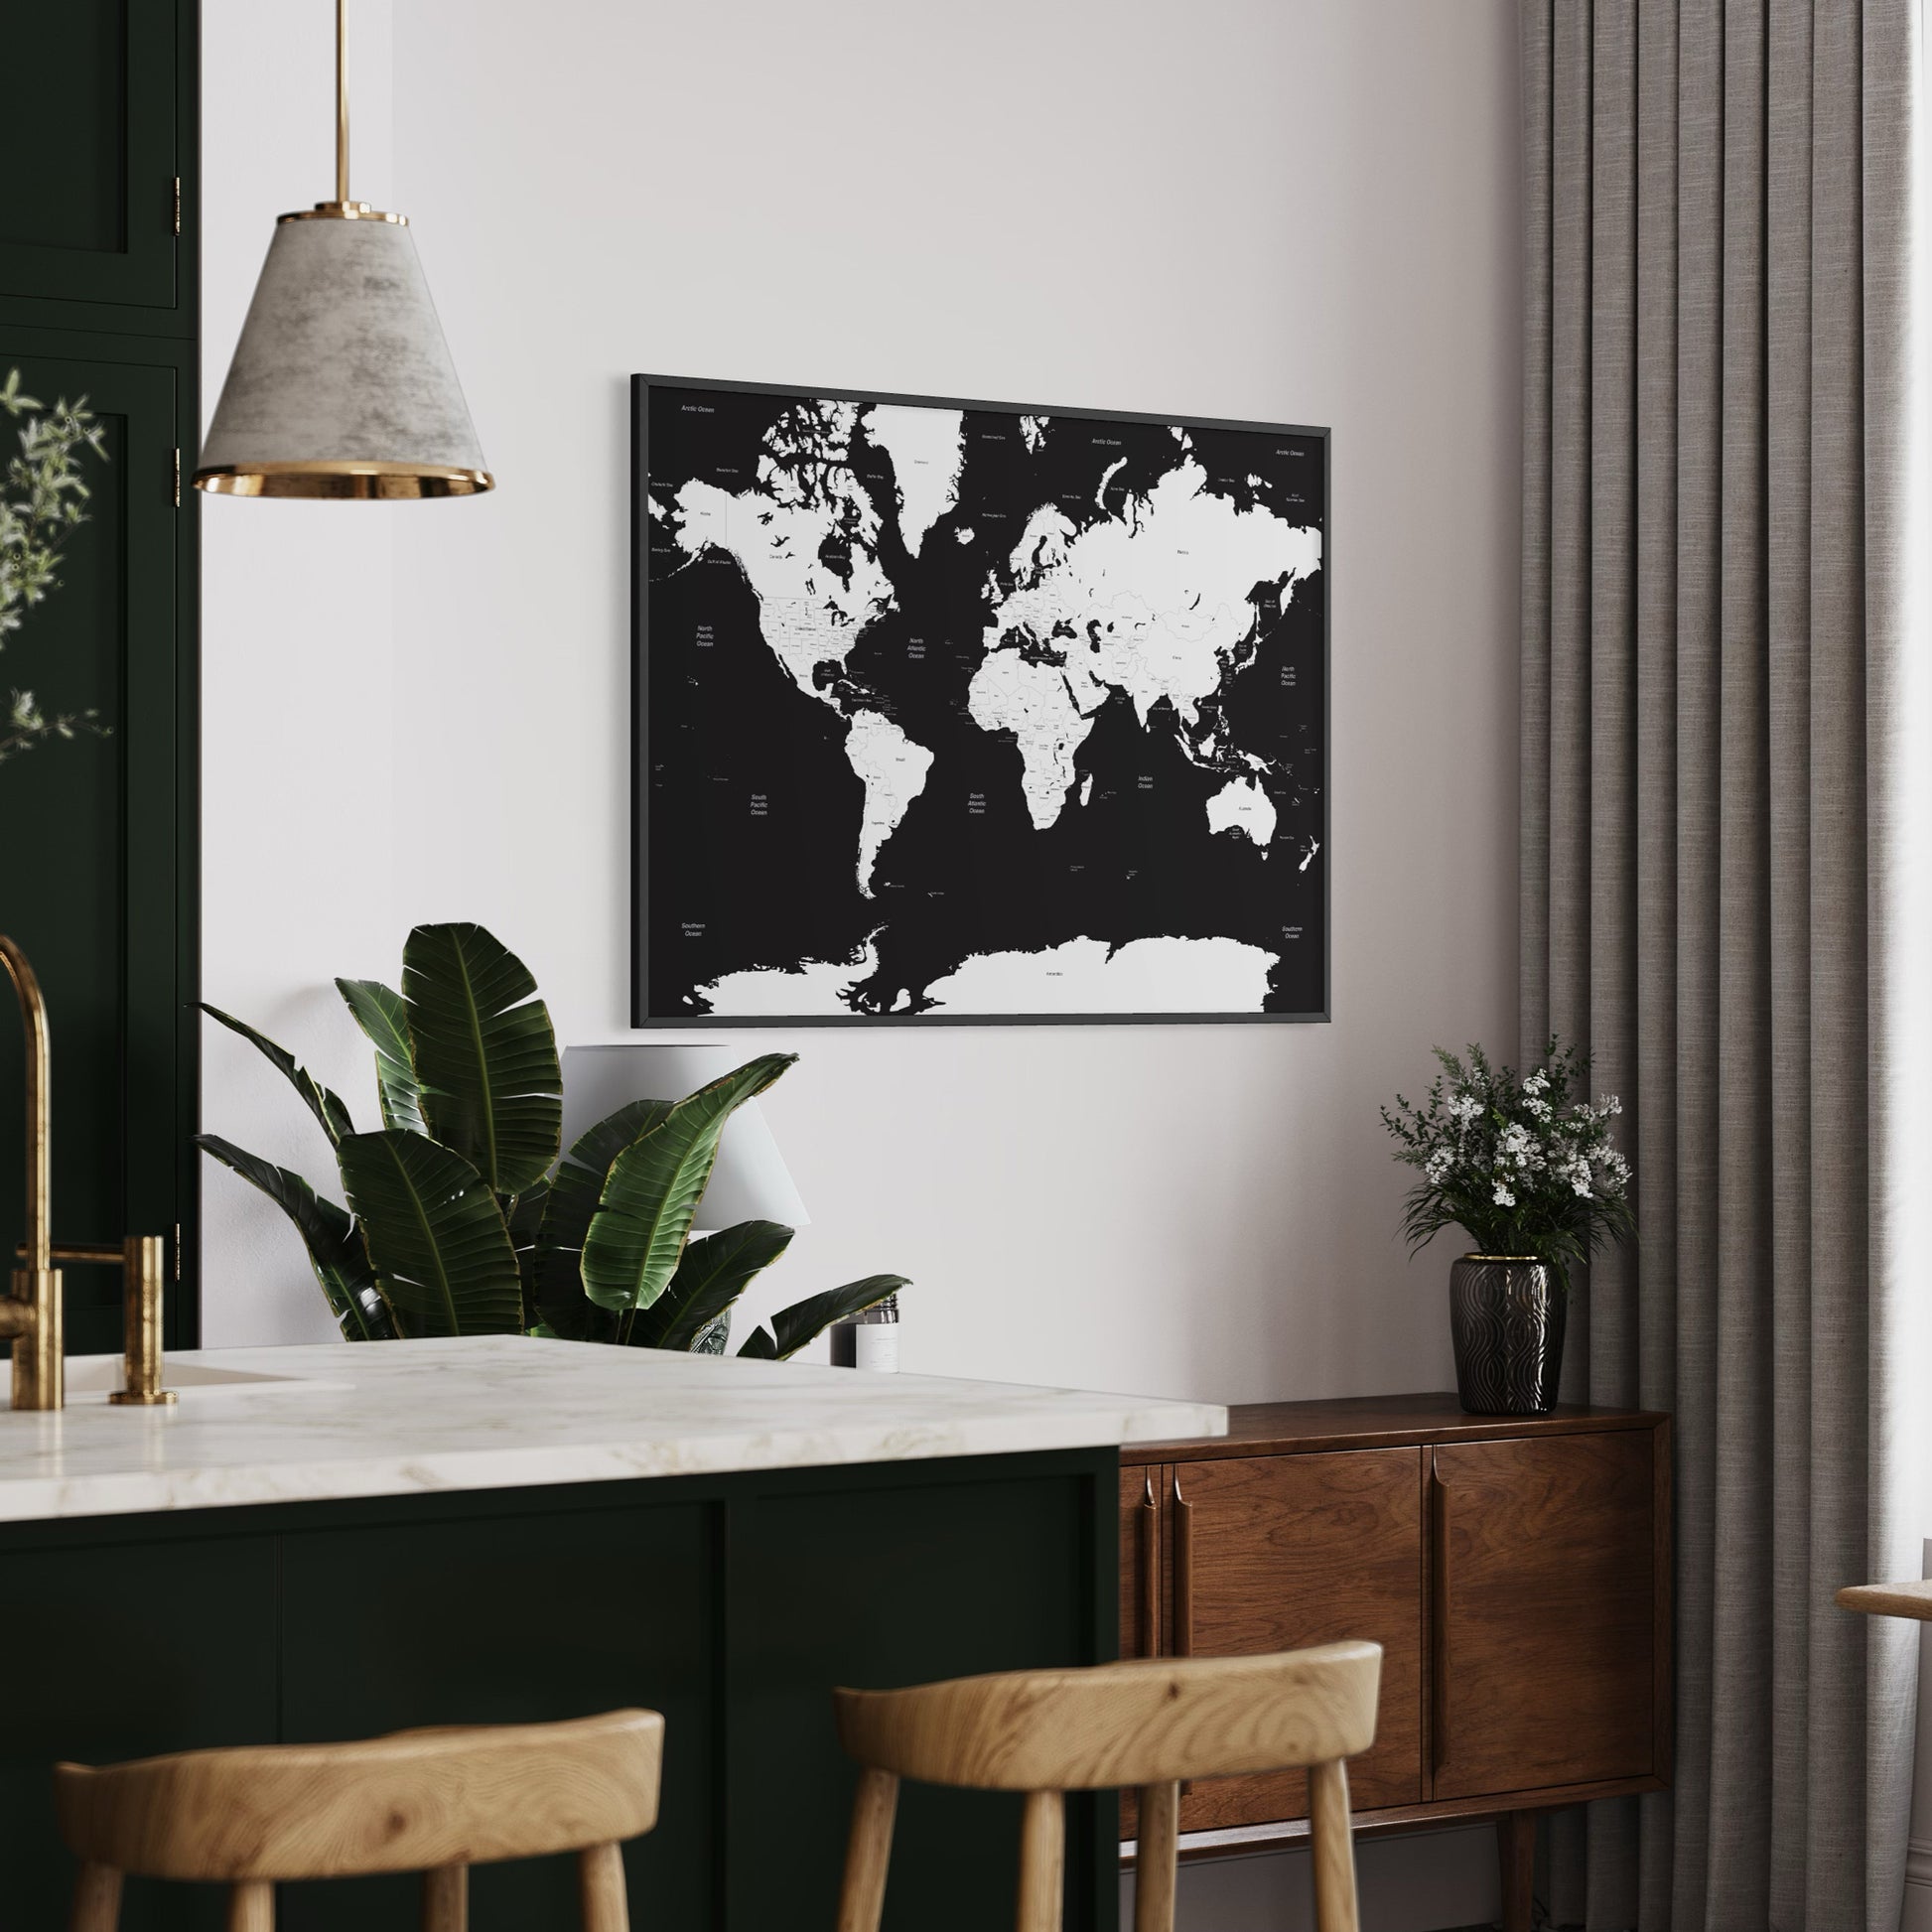 Black Sea White Countries World Map on Wall Above Sideboard